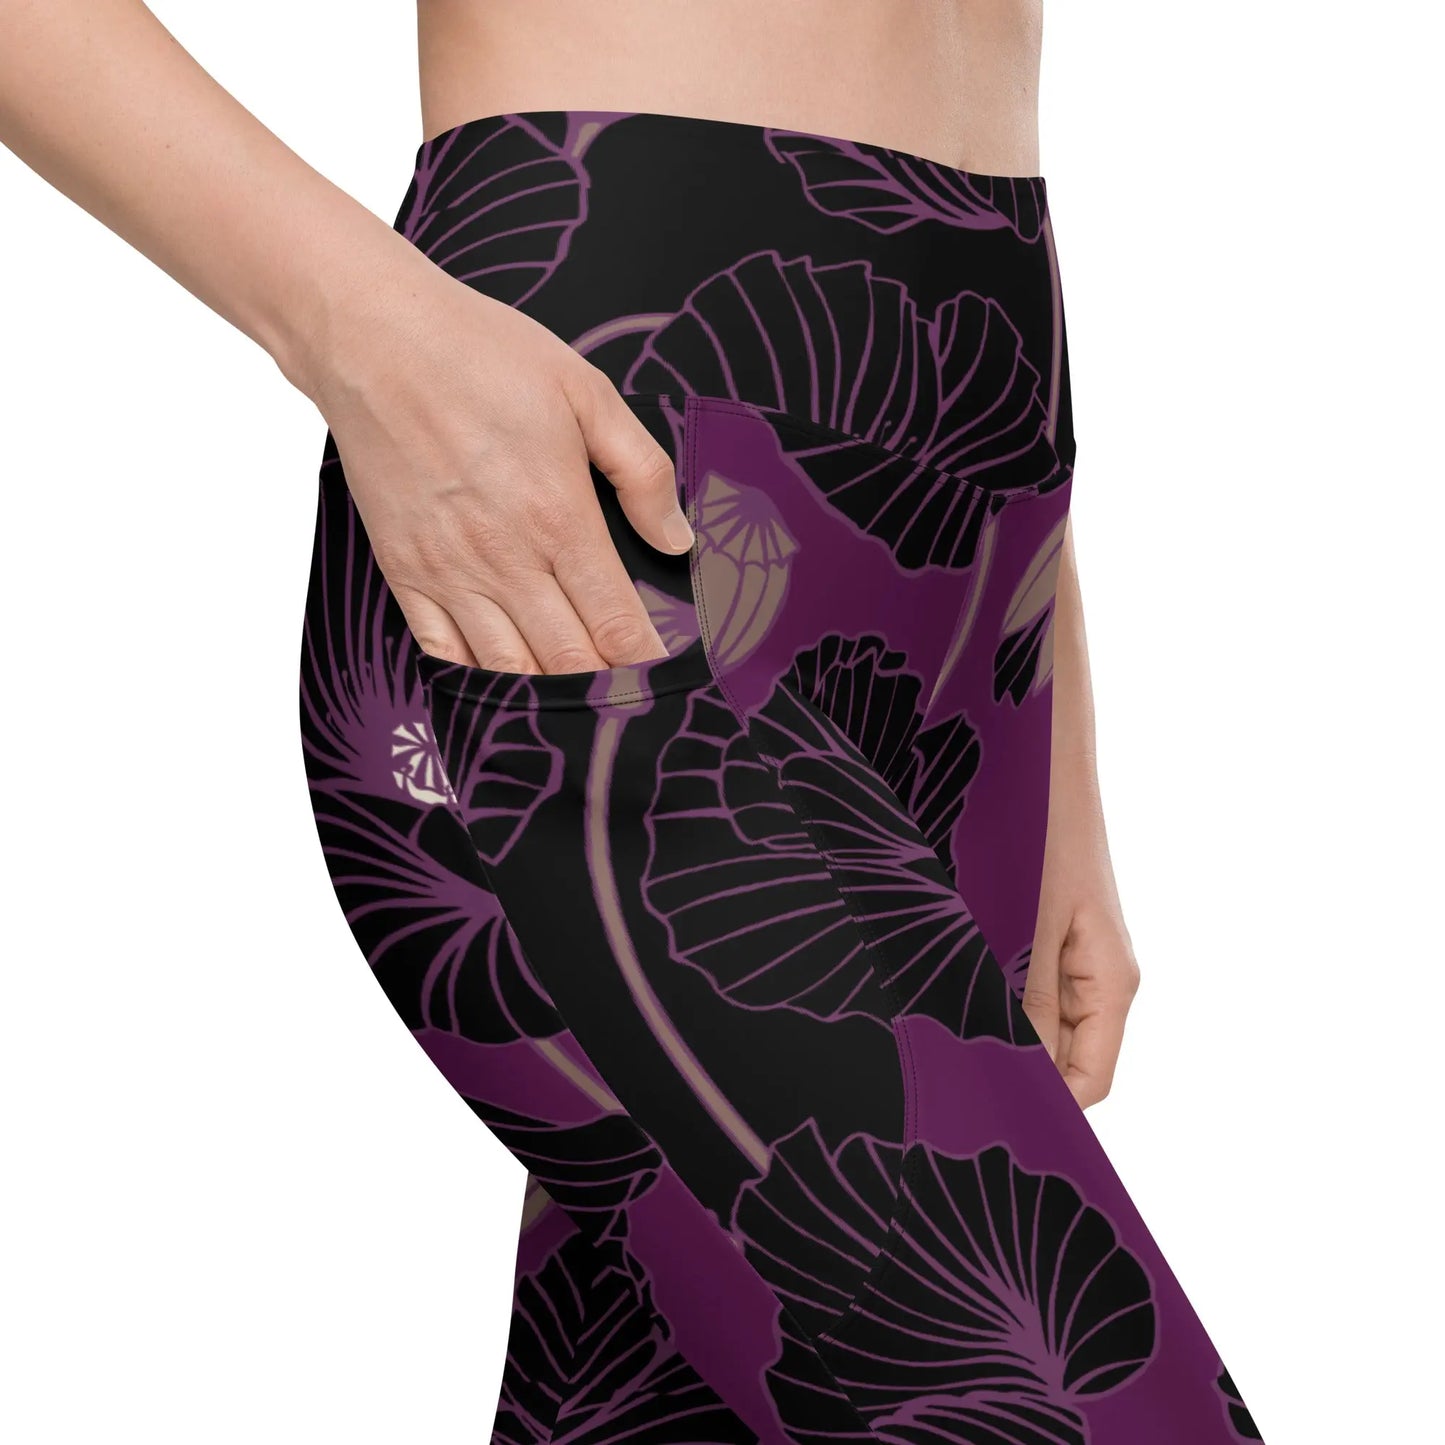 Dark Poppy Combo Printed Legging with Pockets Ellie Day Activewear